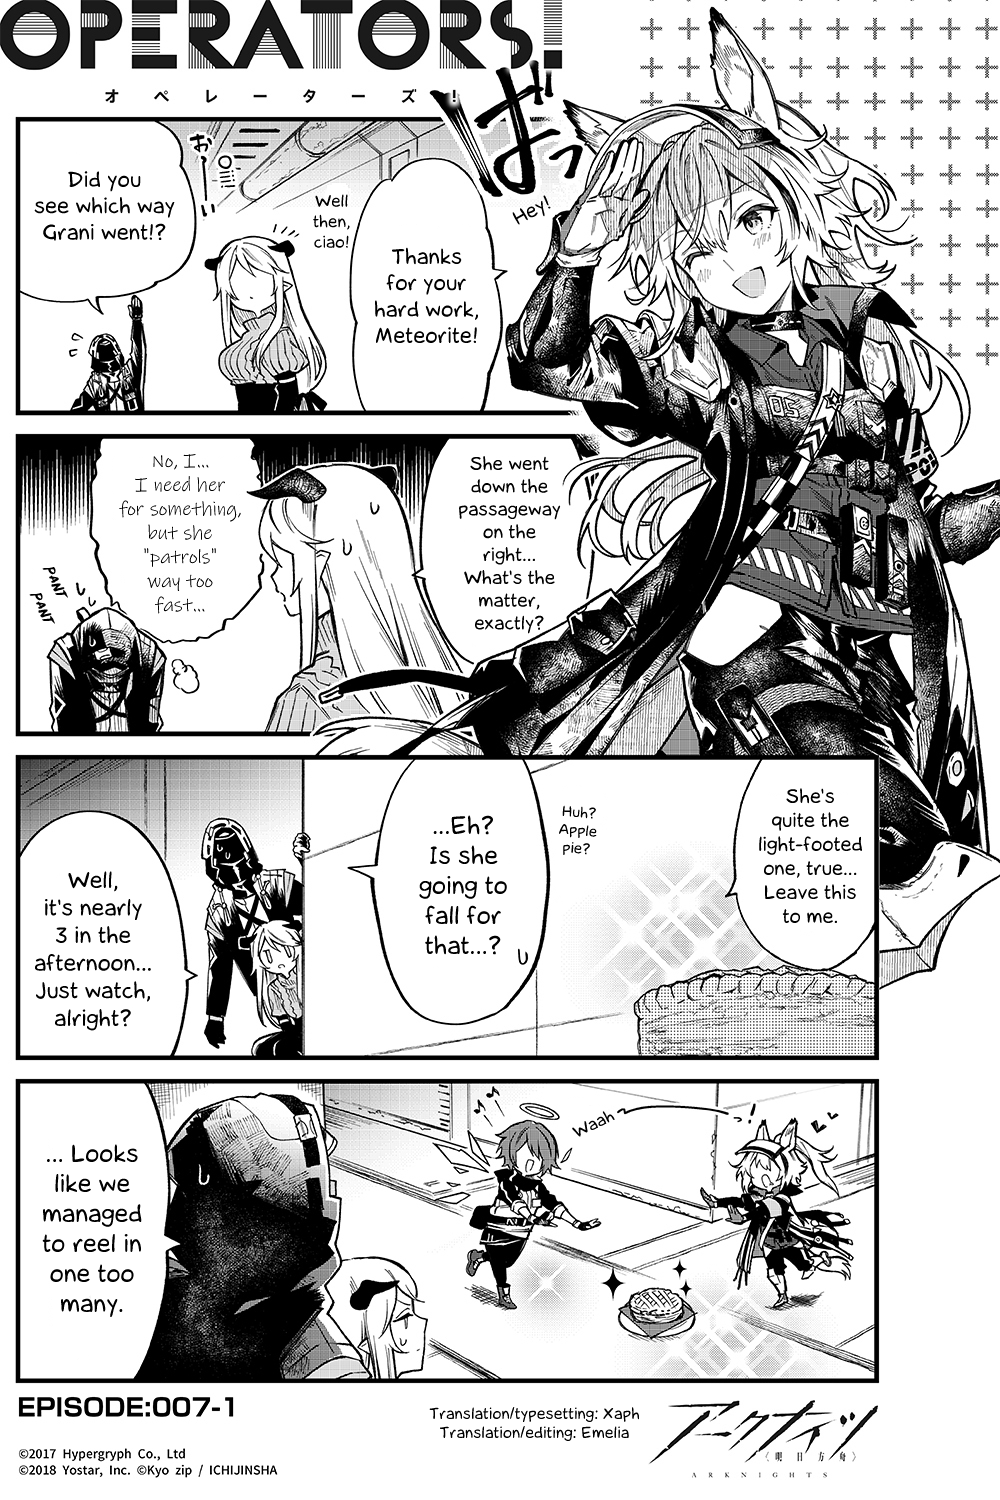 Arknights: Operators! Chapter 7.1 #1